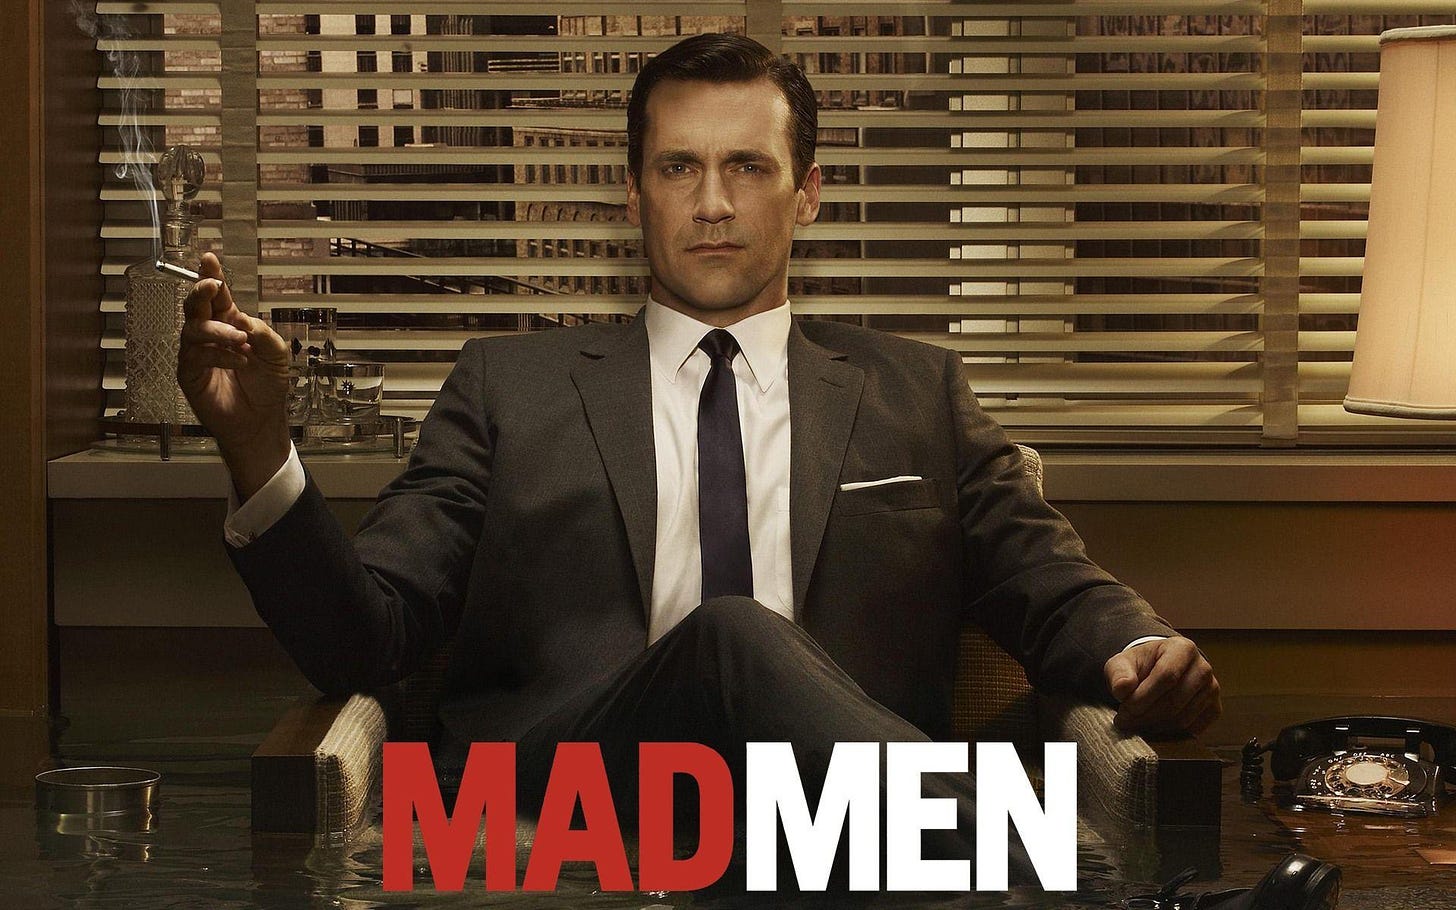 Mad Men featuring Jon Hamm as Don Draper, click here to watch the show.